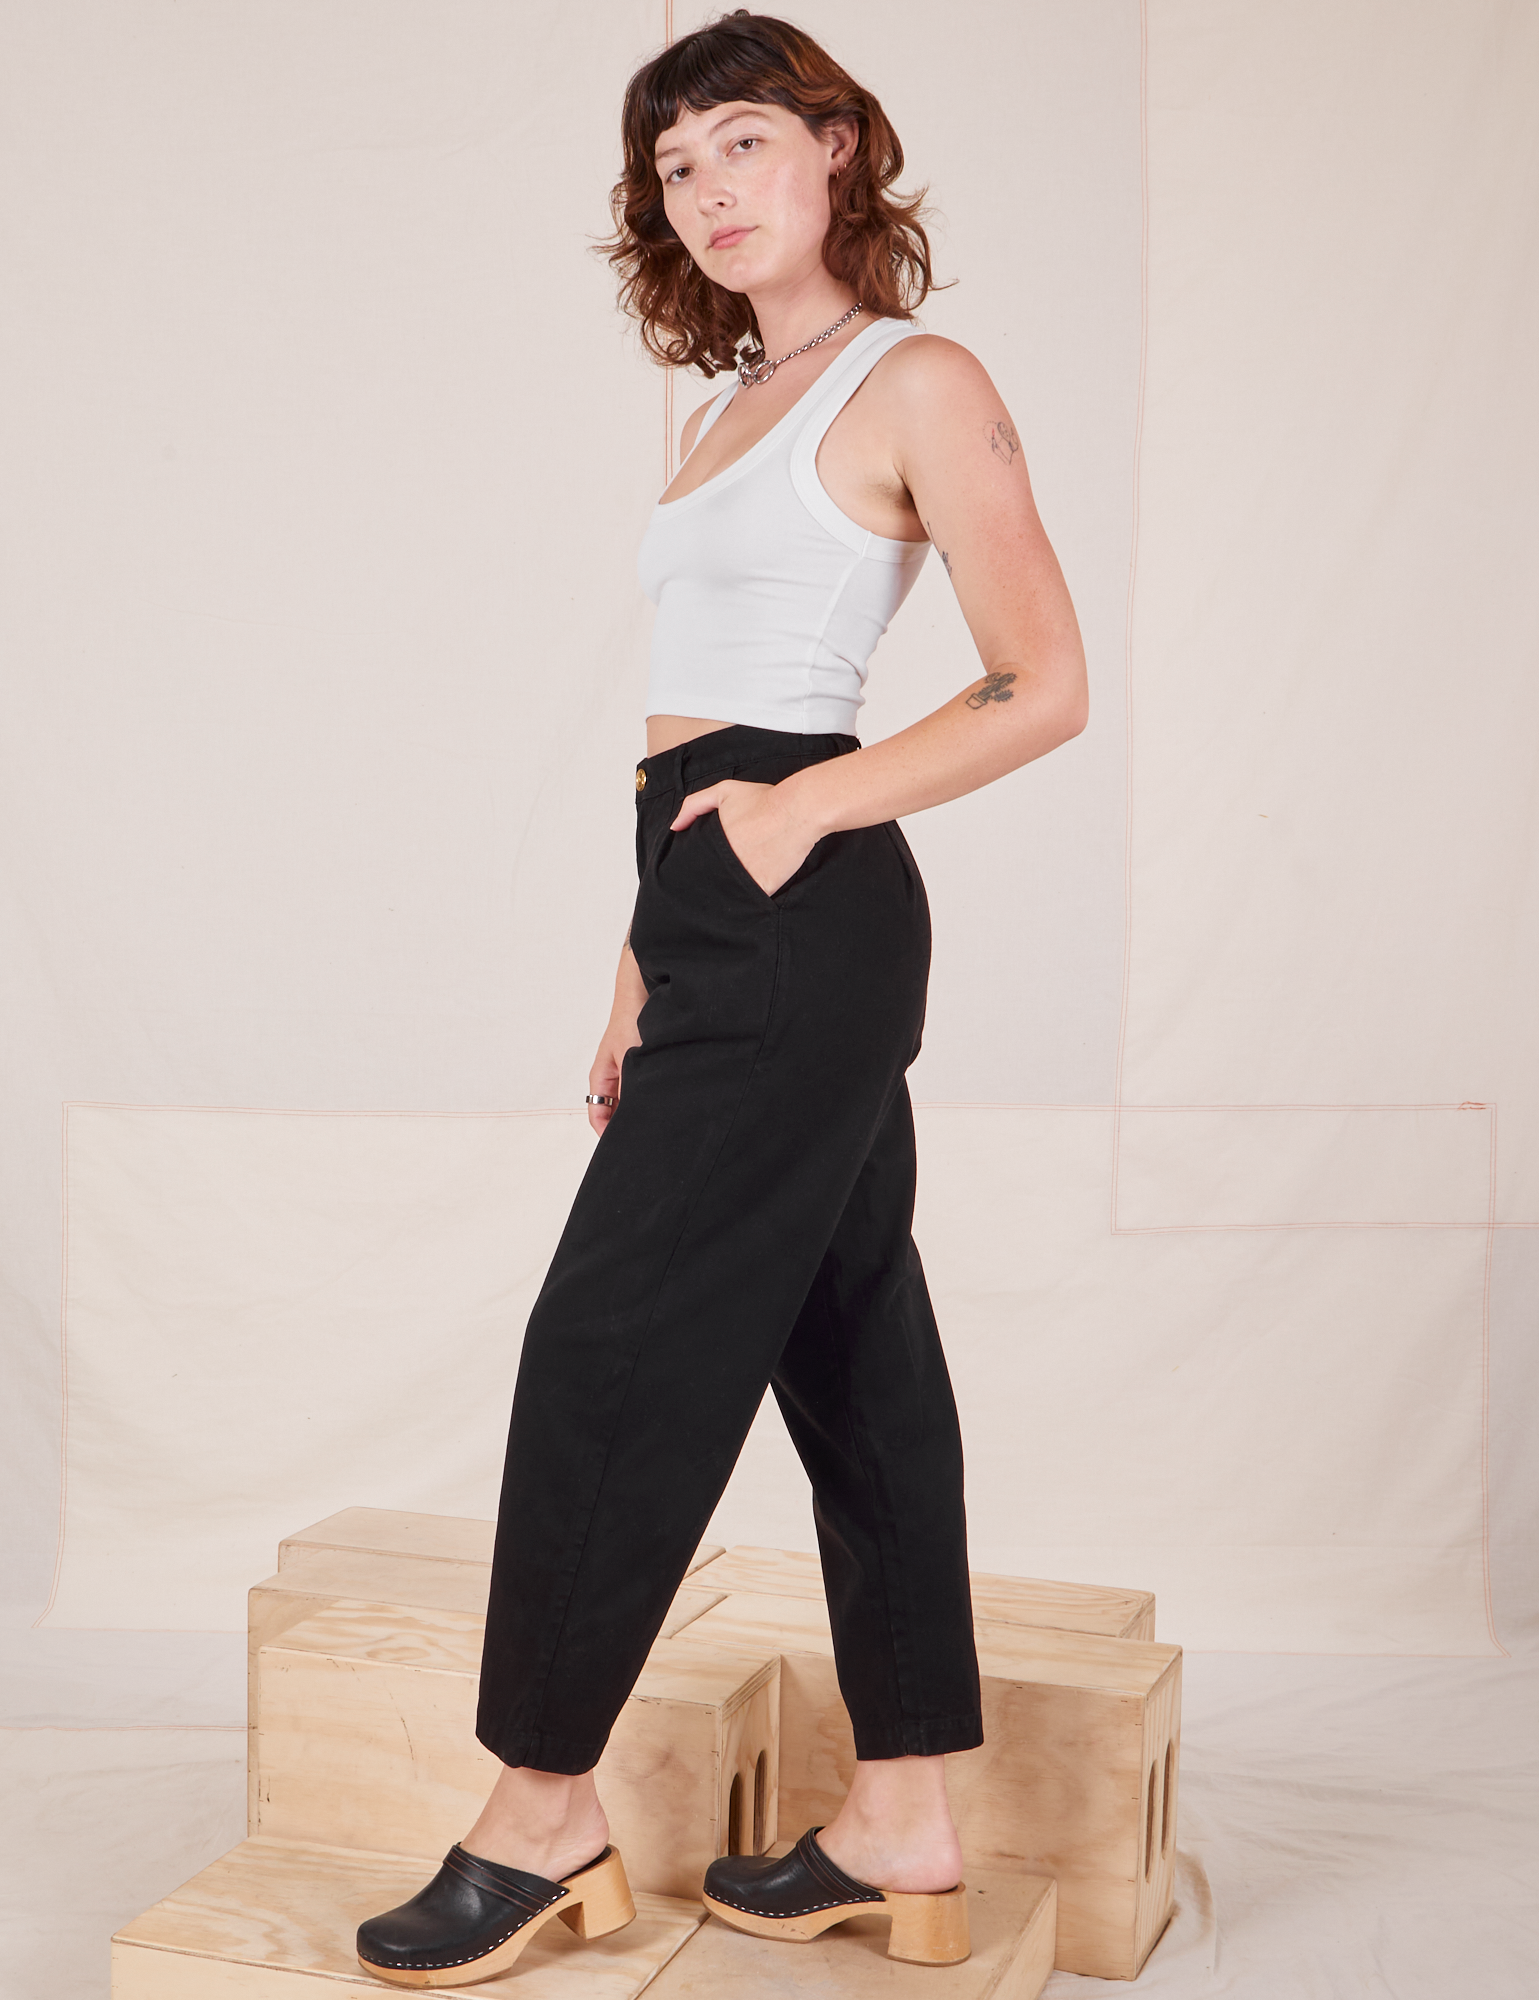 Side view of Heavyweight Trousers in Basic Black and vintage off-white Cropped Tank Top worn by Alex.